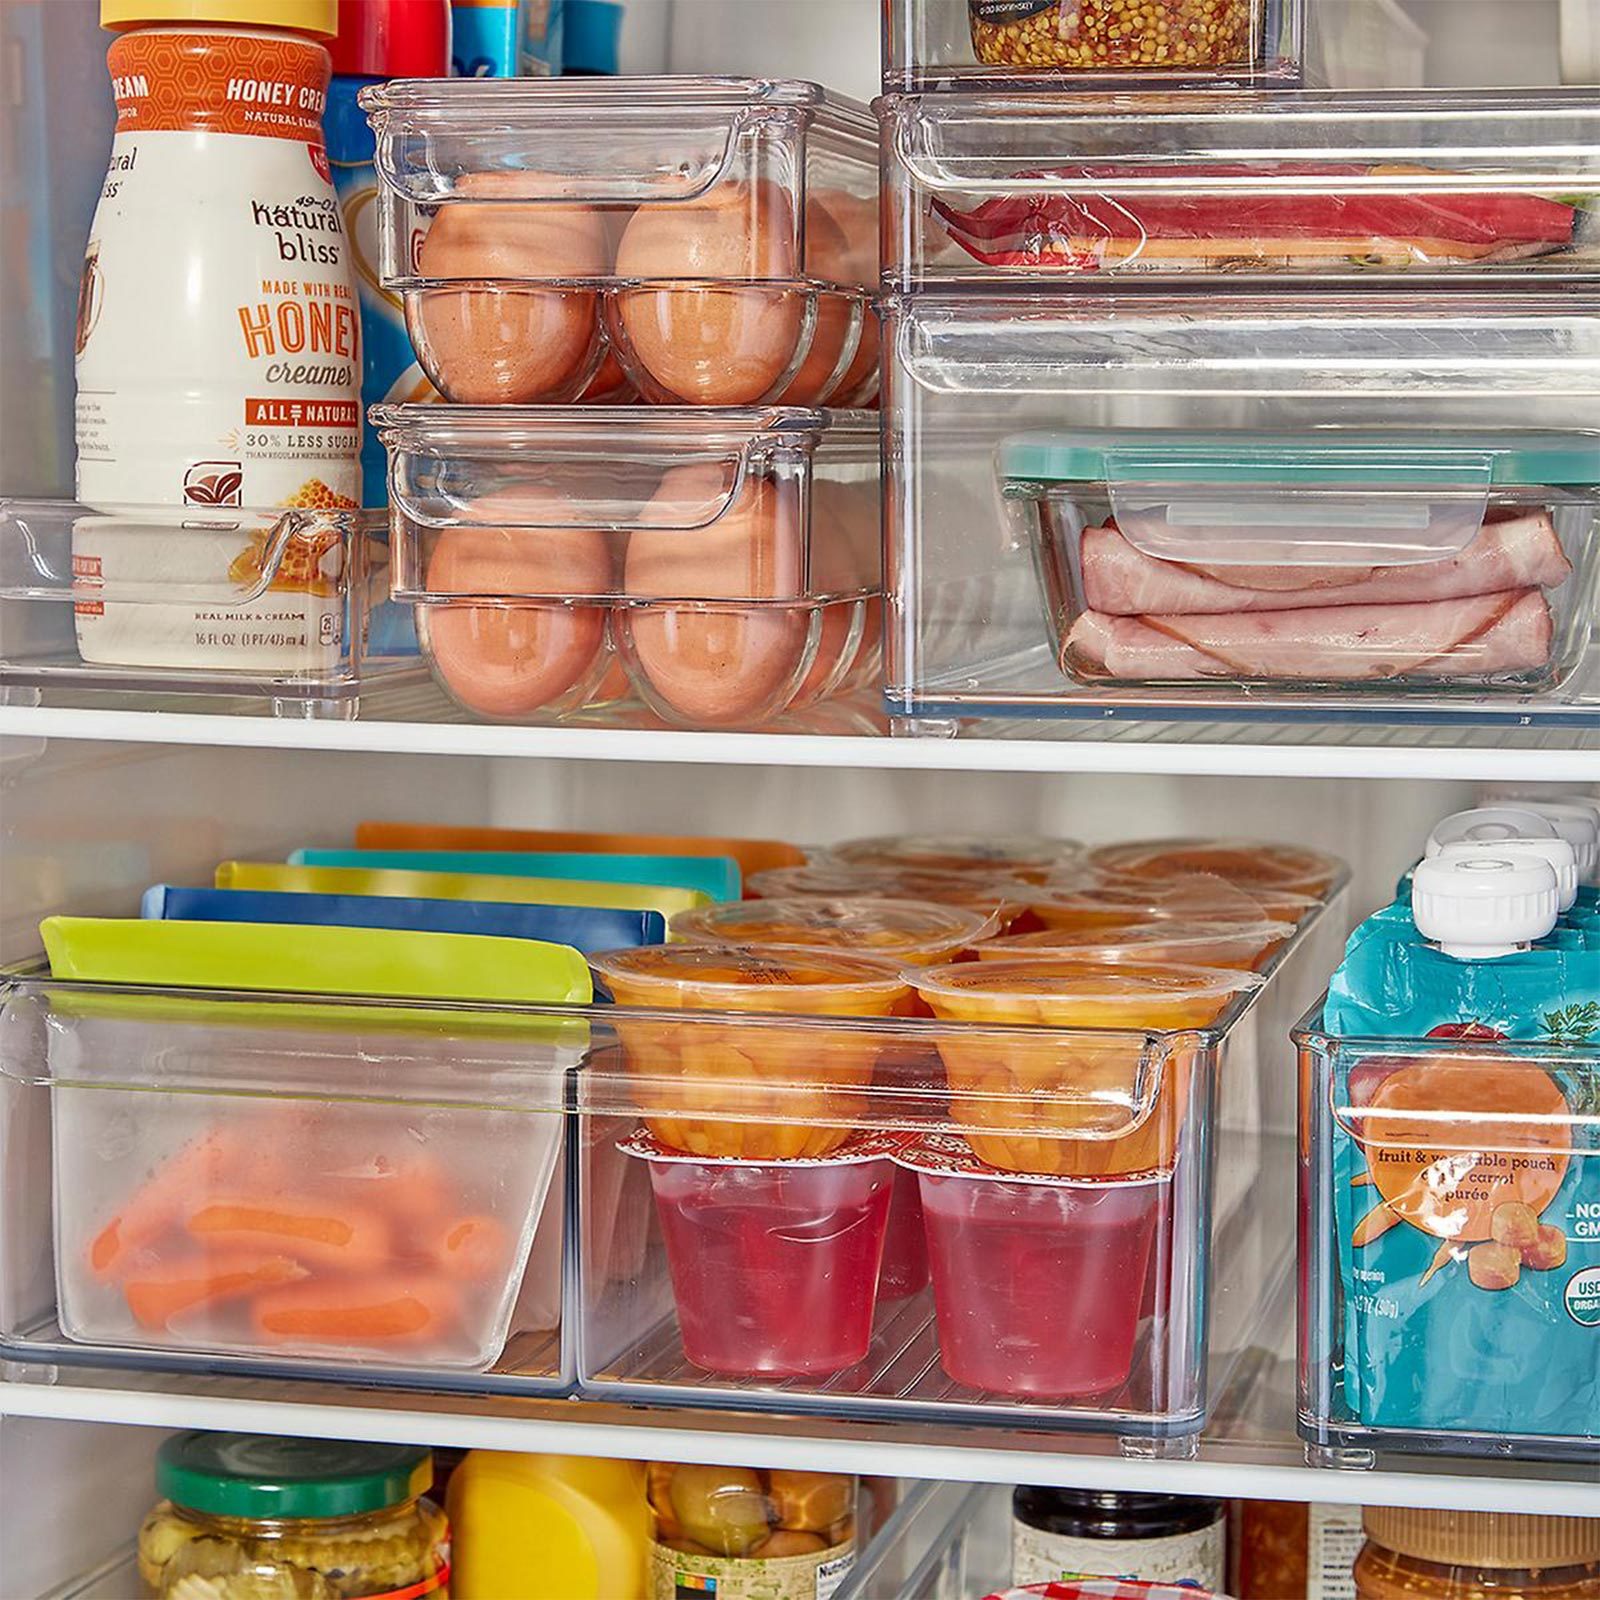 The 9 Best Refrigerator Organizers, Tested & Reviewed